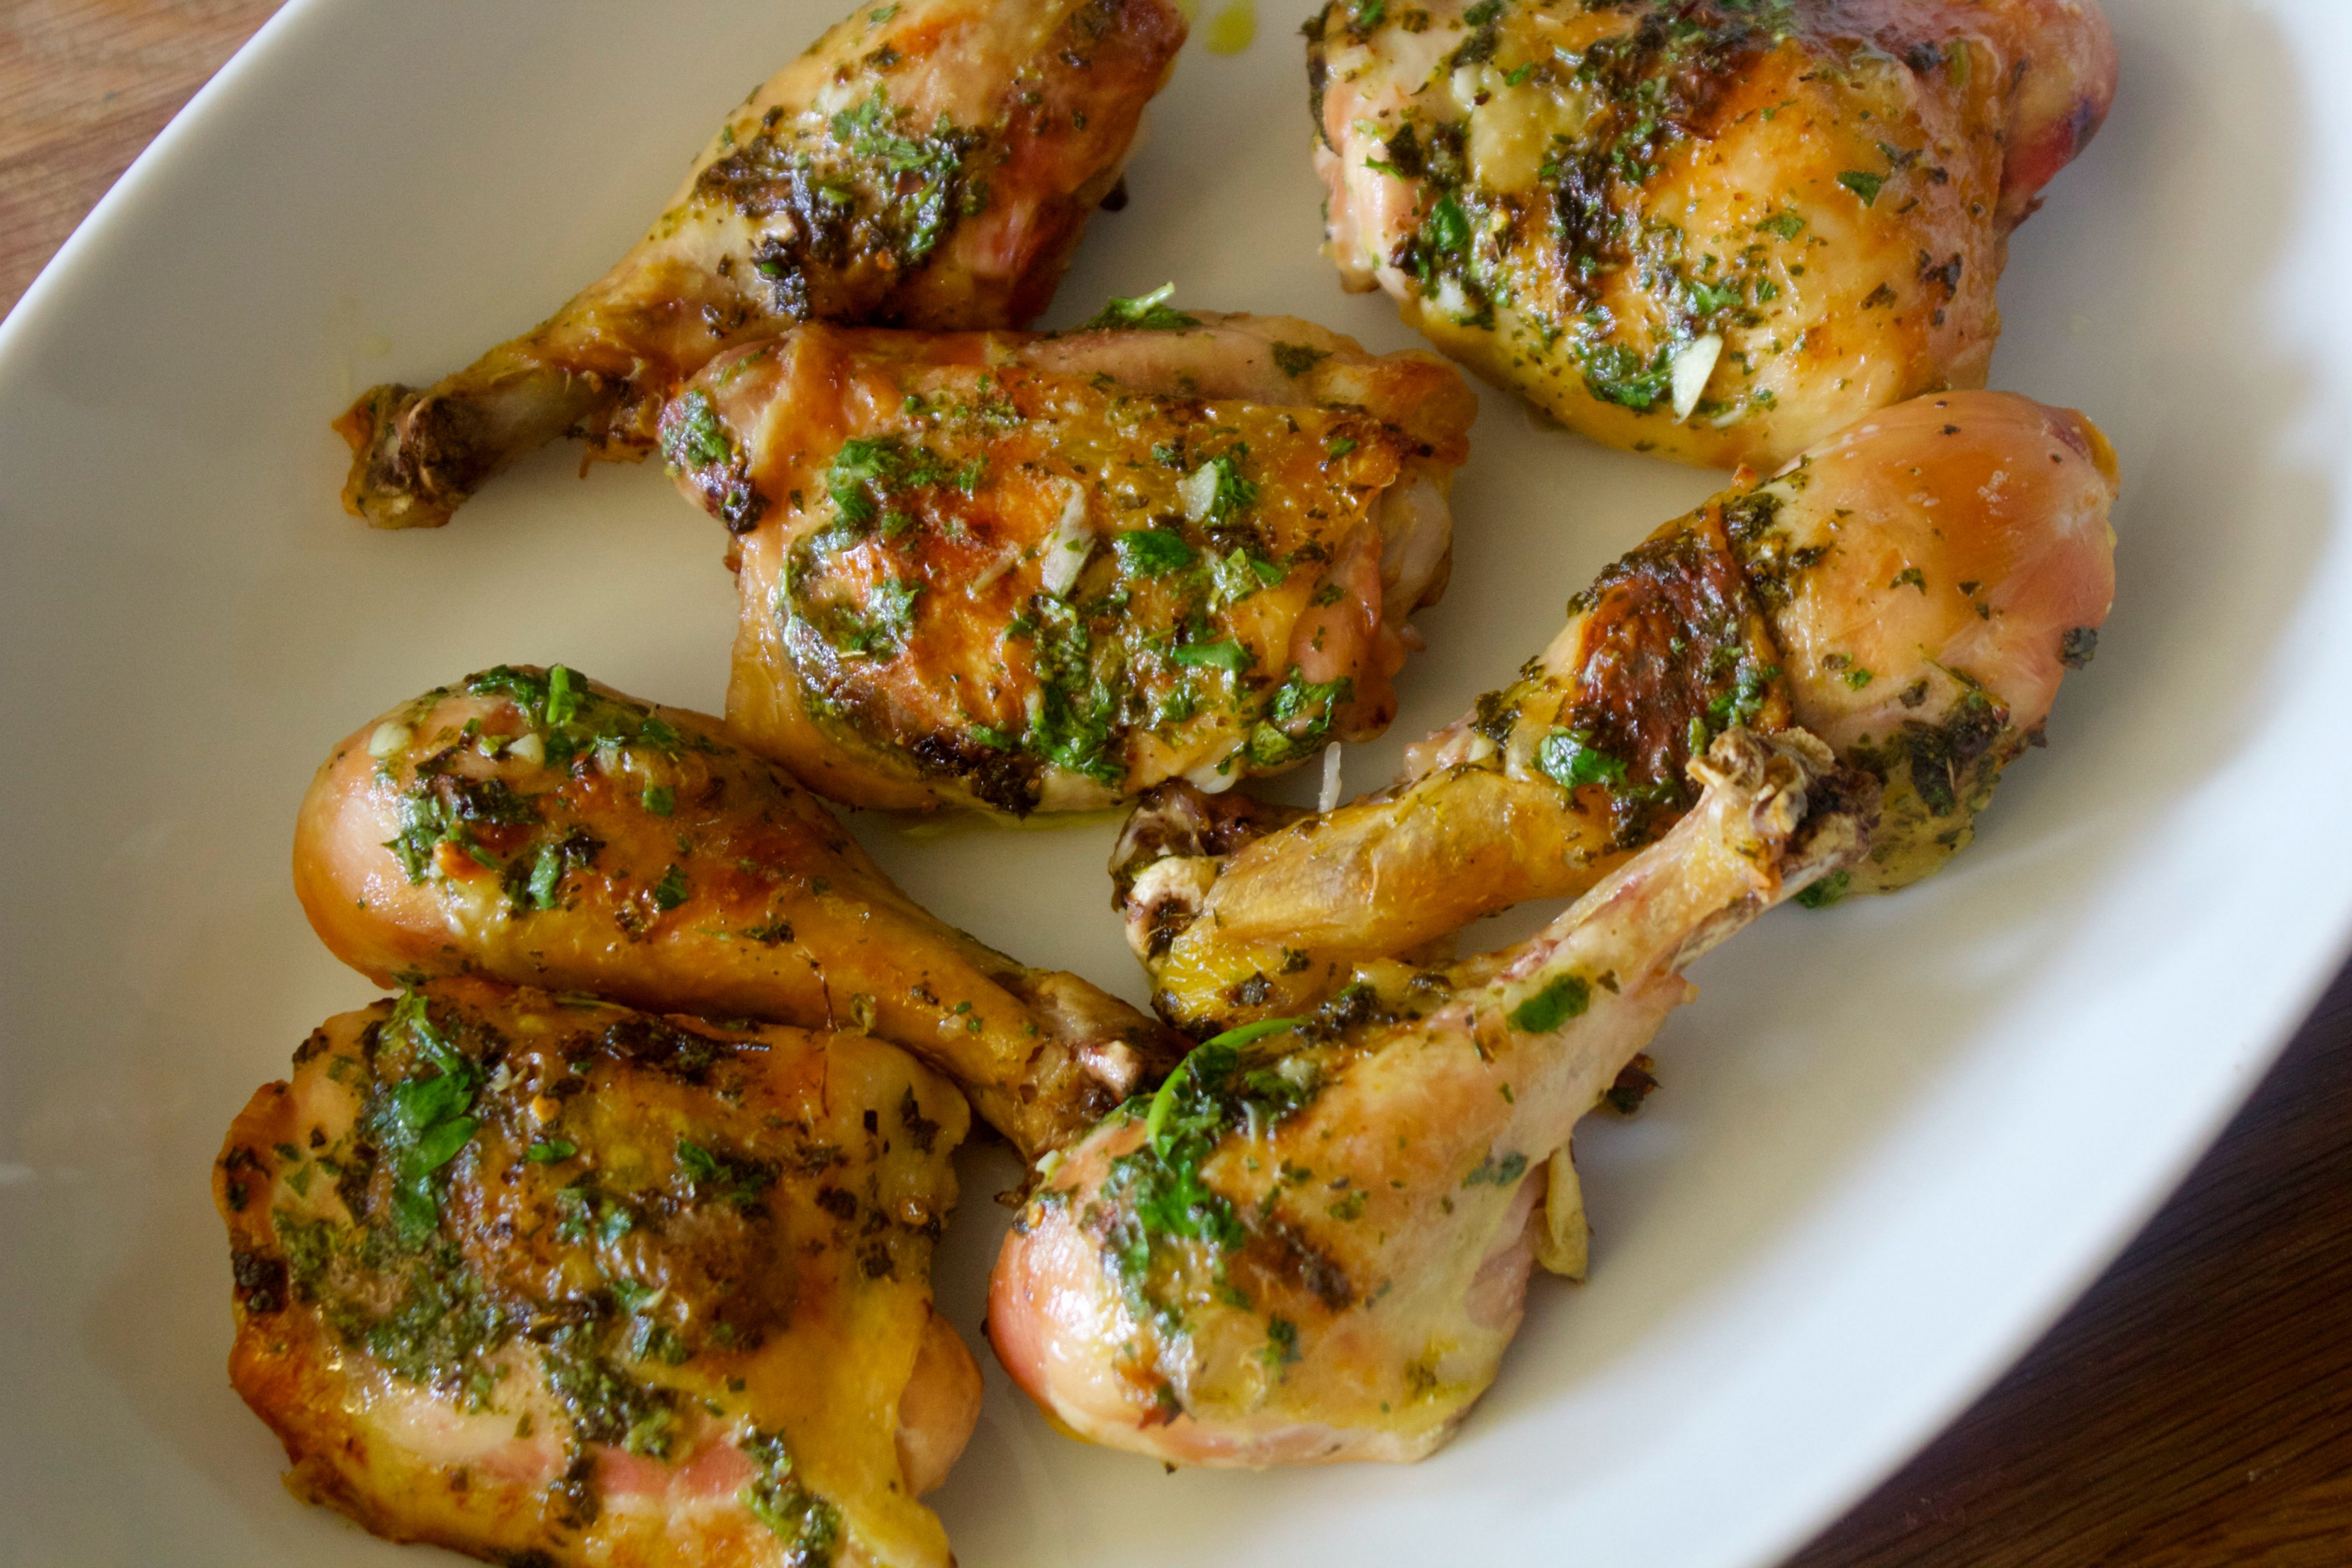 This delicious chimichurri butter chicken makes for an easy weeknight meal.